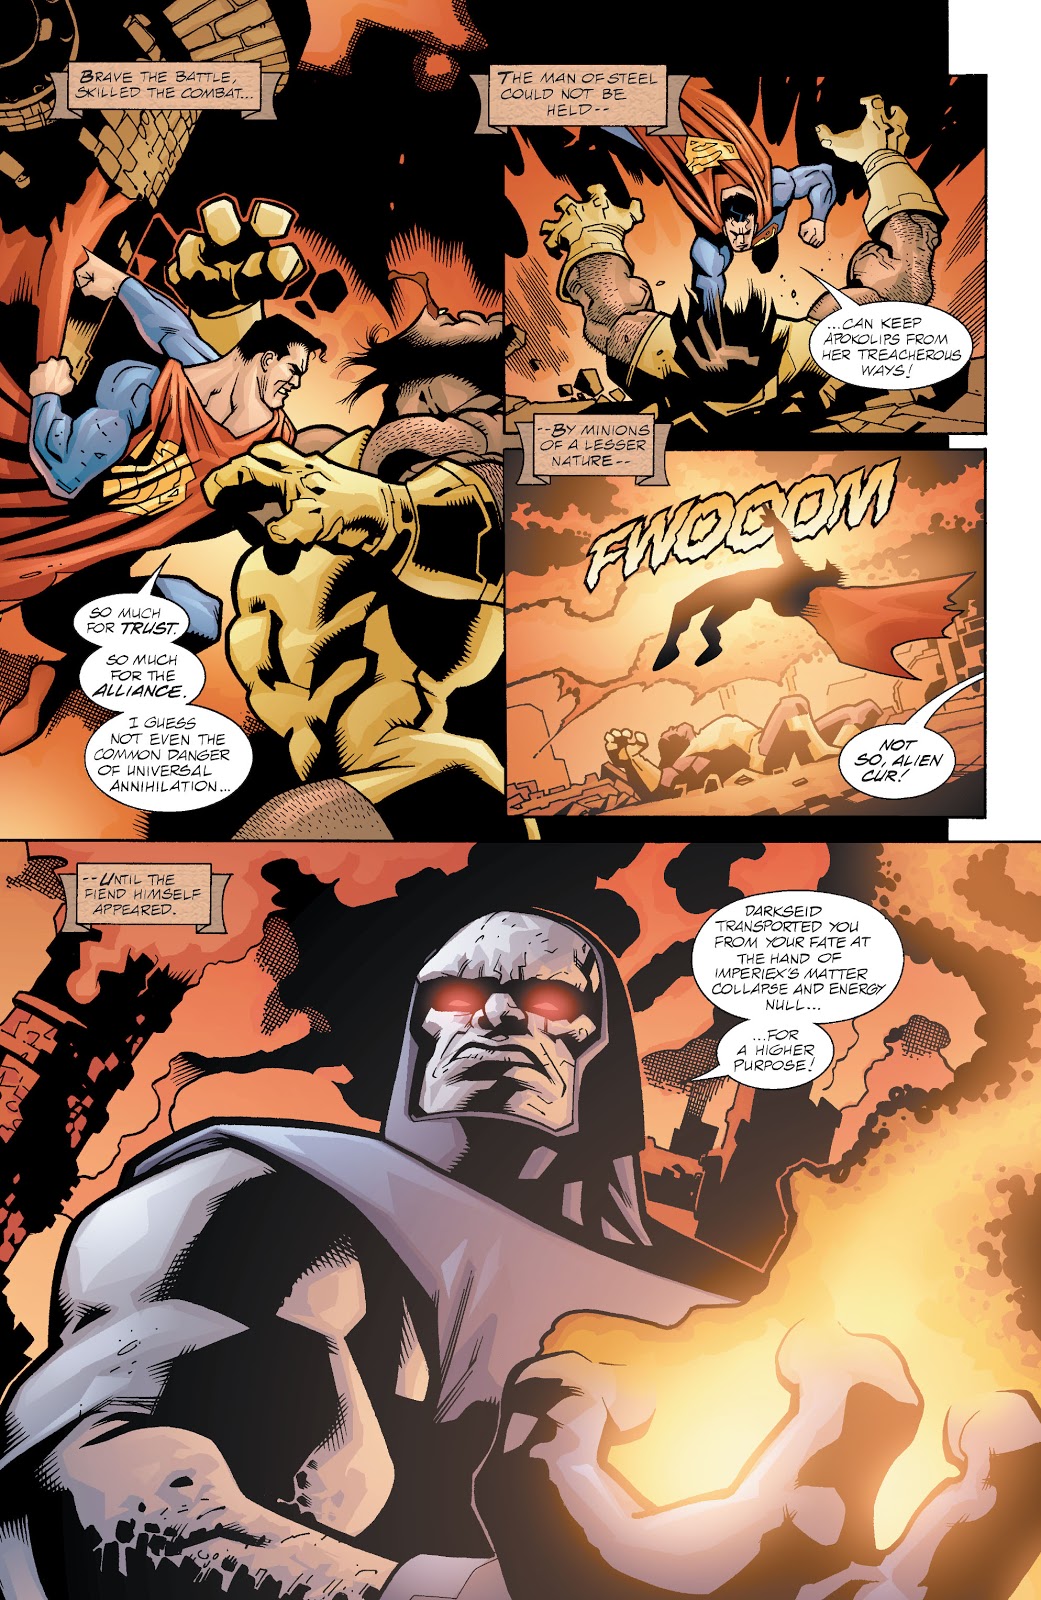 In 'Our Worlds At War: Man Of Steel' (2001) #116, Darkseid fells Superman with the Omega Effect.